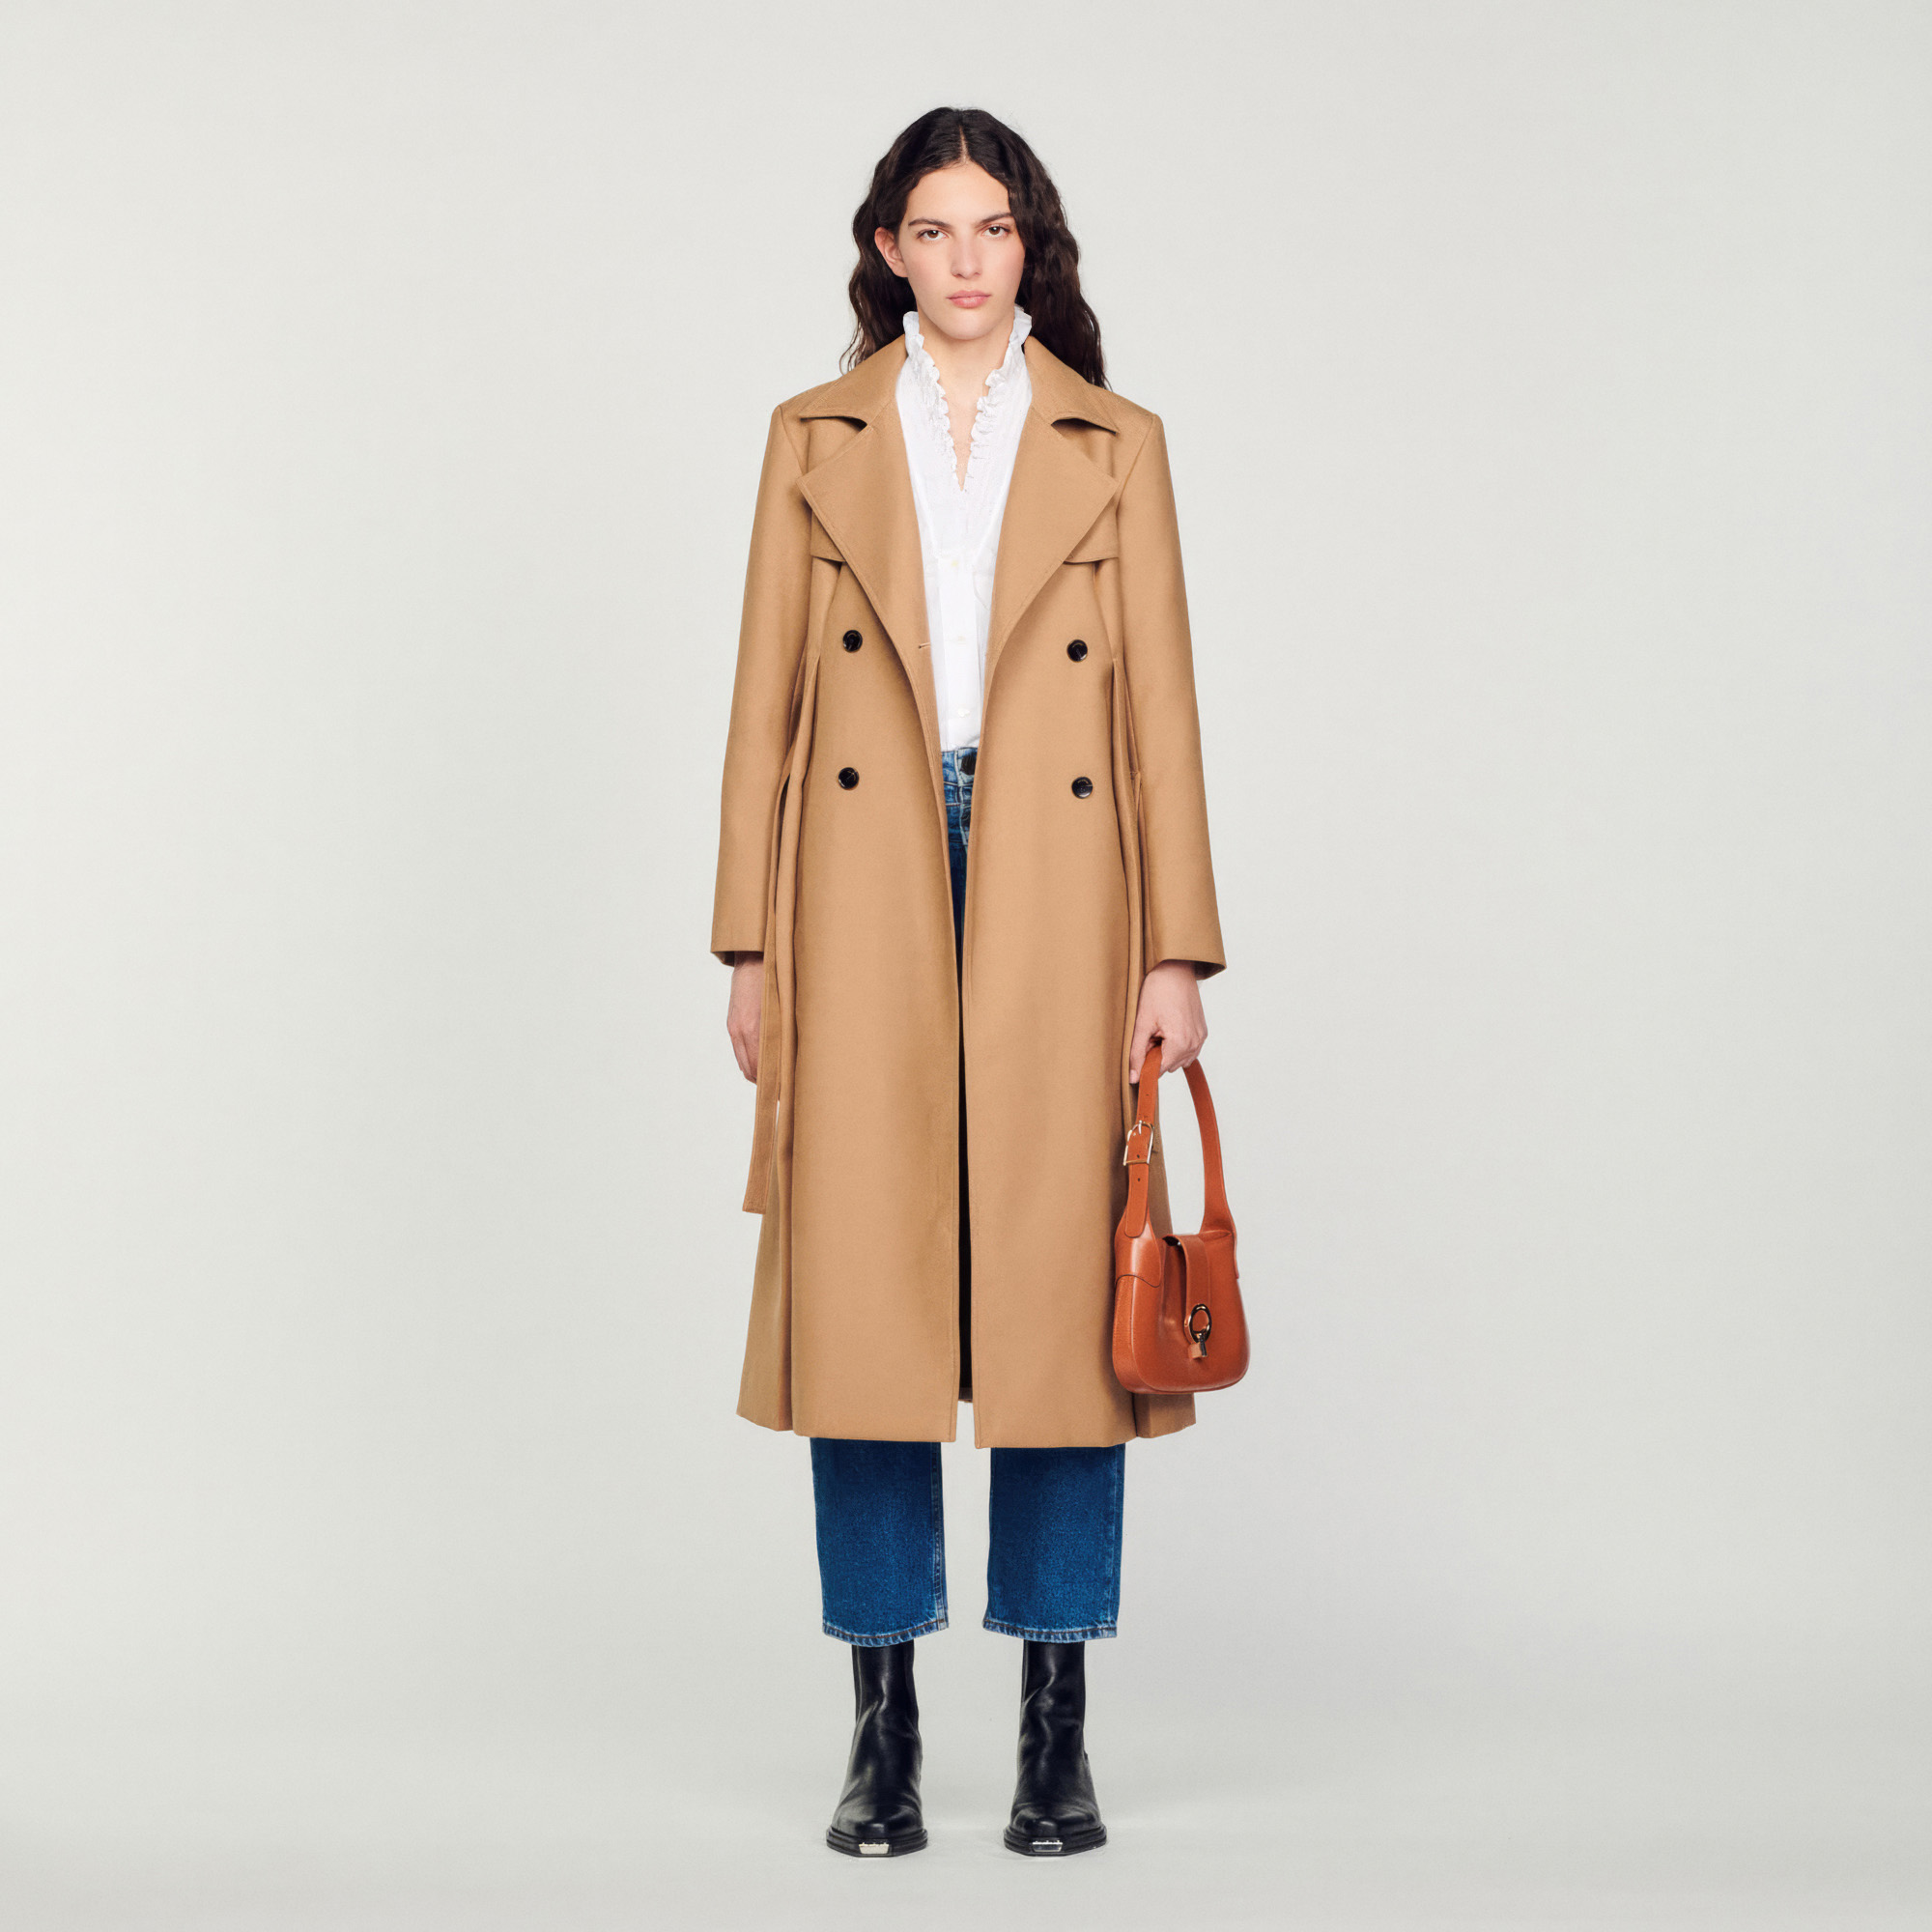 Sandro polyester Long wool blend coat in a trench style